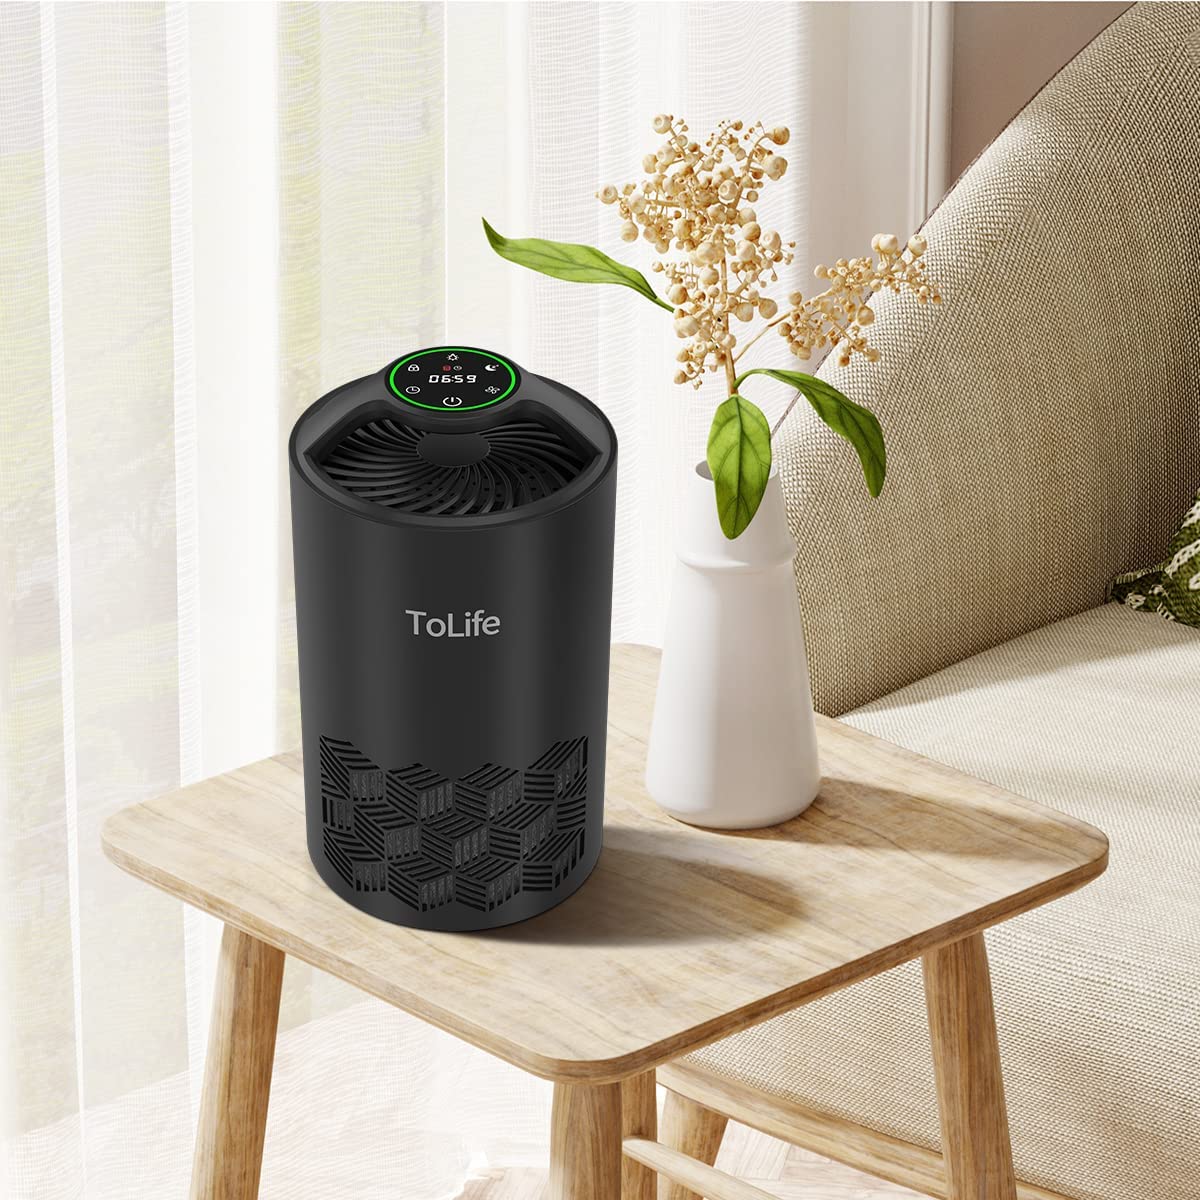 ToLife Air Purifiers for Home with H13 True HEPA Filter, Air Purifier for Home Large Room Cleans up to 215 Sq. Ft and Filters 99.9% of Allergens, Pet Dander, Dust, 25dB Quiet Air Cleaner for Bedroom- Black